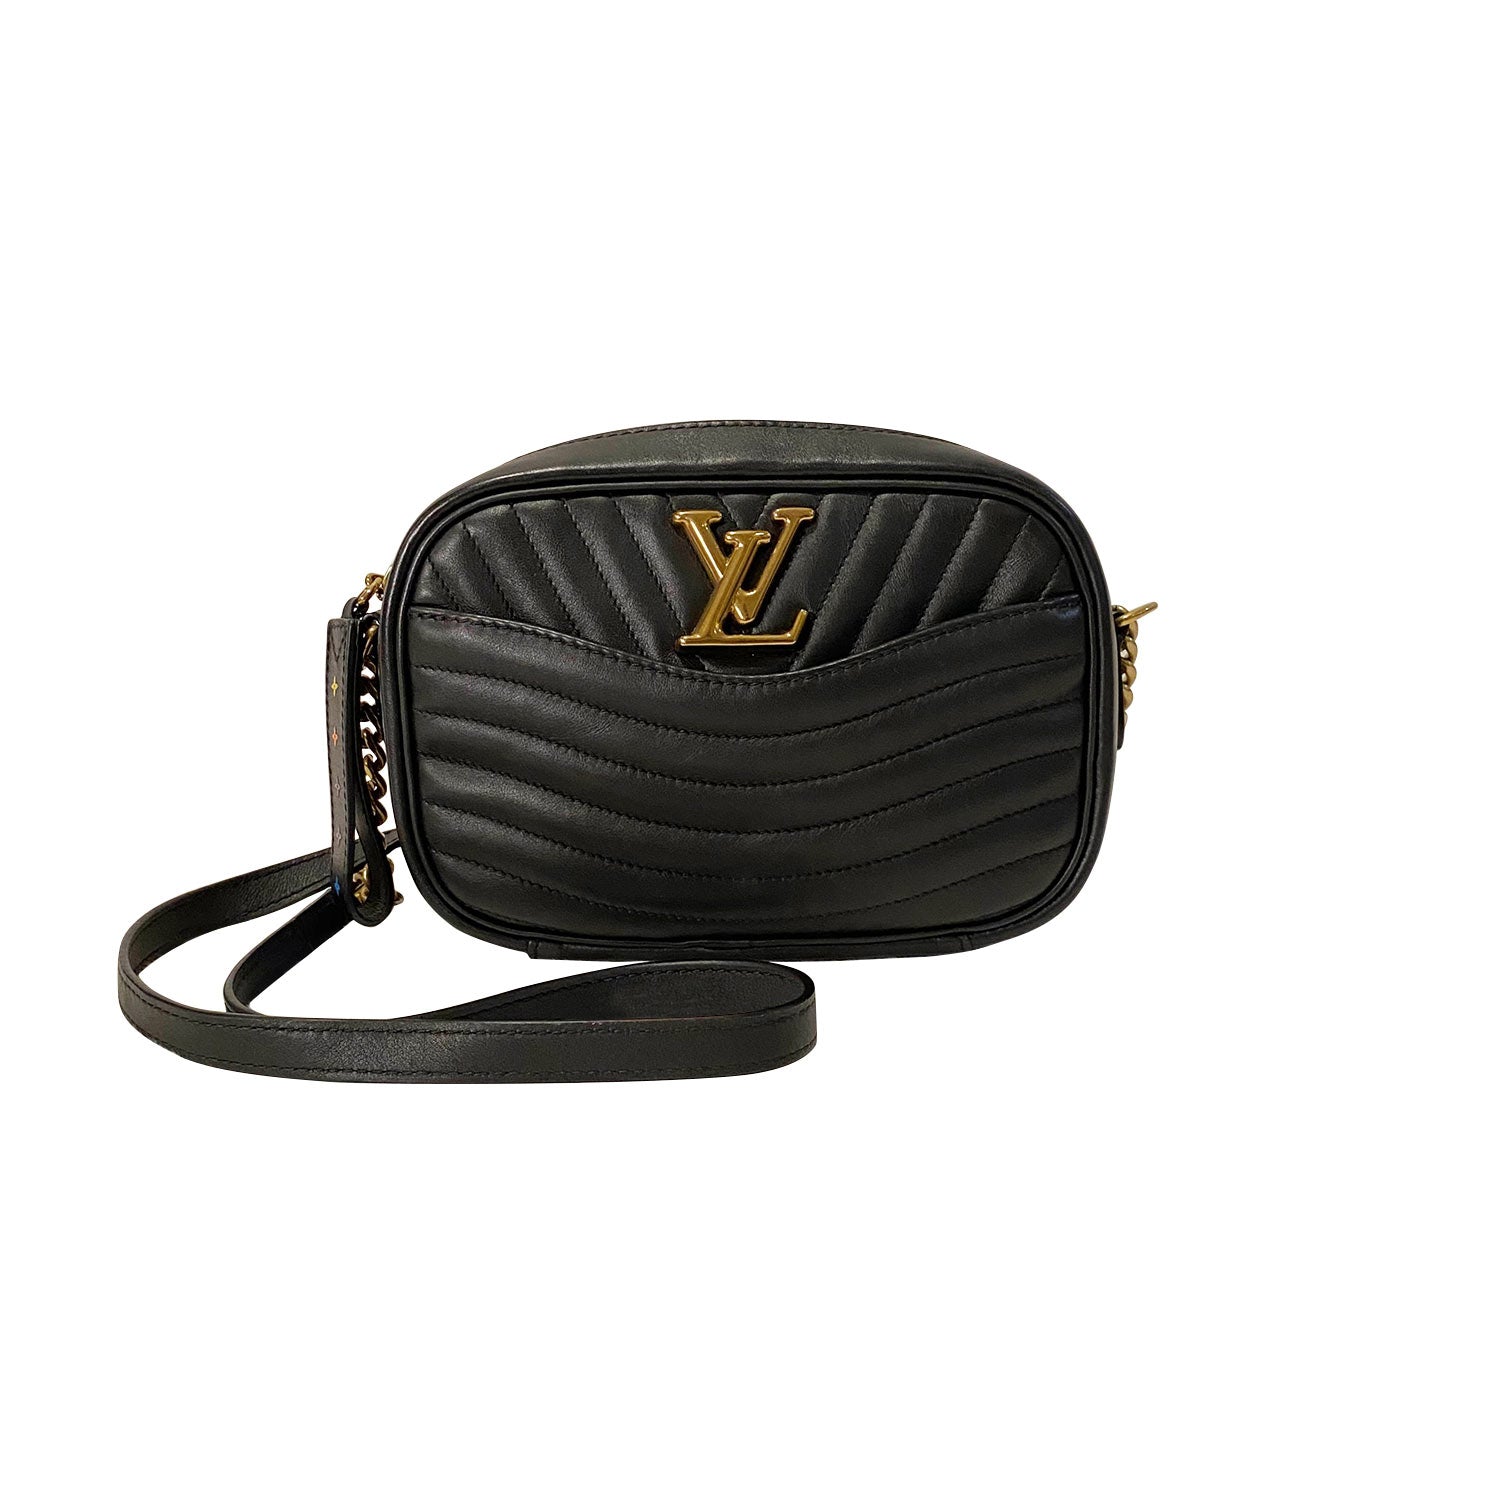 Compare prices for Louis Vuitton New Wave Camera Bag (M53682) in official  stores